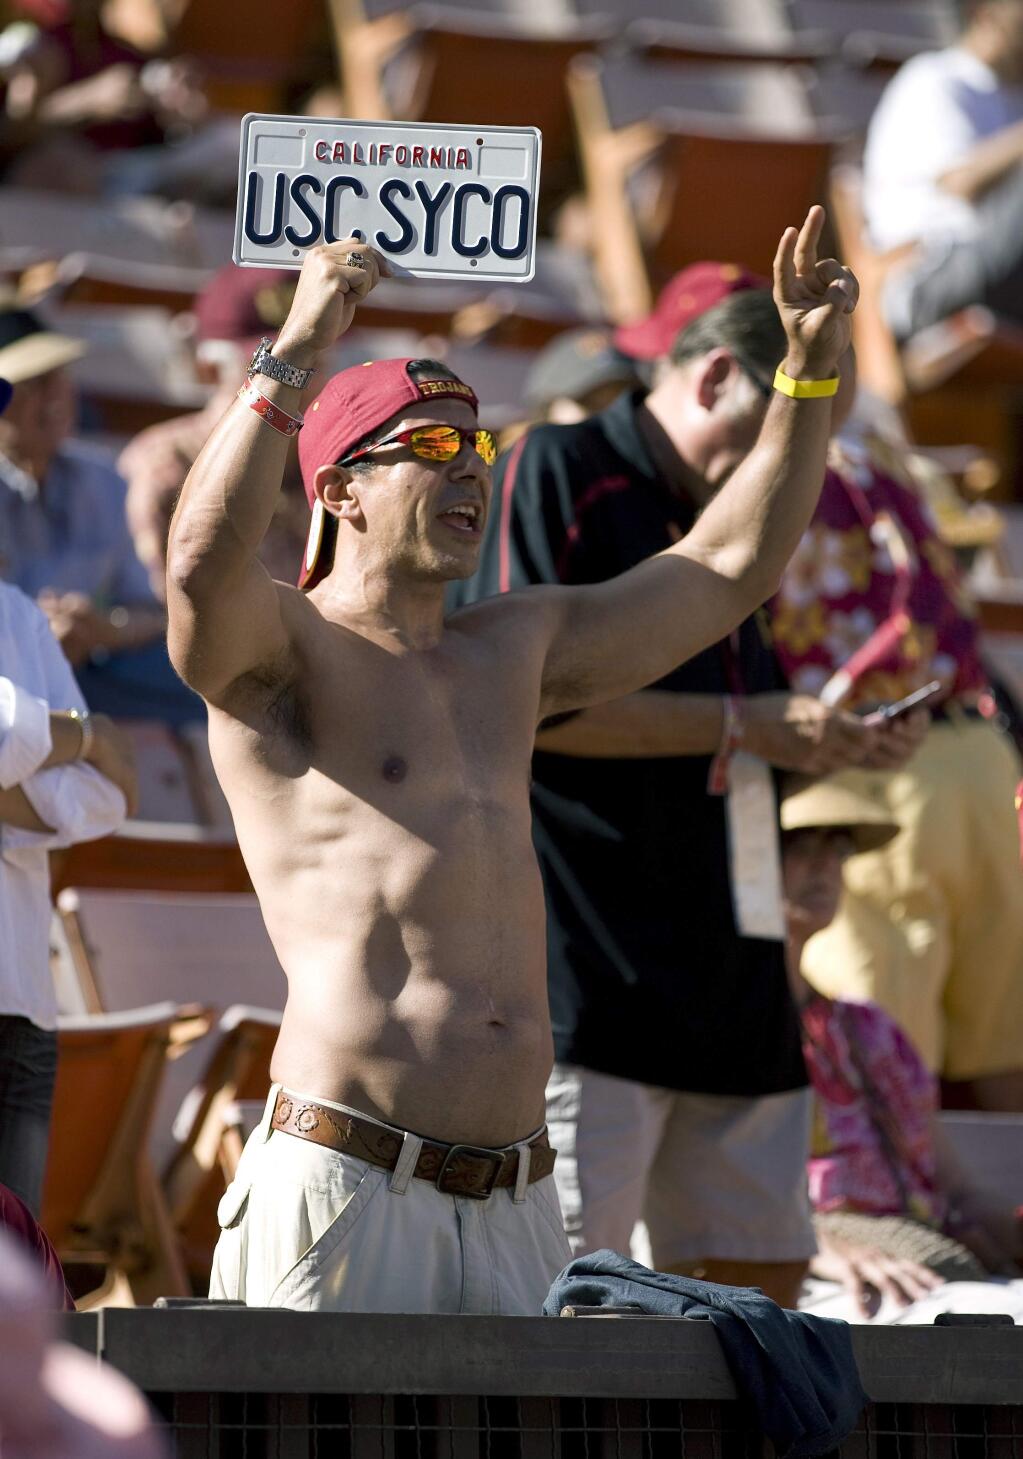 FILE - In this Sept. 2, 2010 file photo Roy Nwaisser, of Los Angeles, cheers during an NCAA college football game between the University of Southern California and Hawaii at Aloha Stadium in Honolulu. Nwaisser has four degrees from the University of Southern California and is a super fan of its storied football squad - he hasn't missed a home or away game in 27 years. But his devotion has been tested by a series of scandals culminating with the school's starring role in a massive college admissions bribery case that is the latest disgrace threatening to tarnish USC's hard-fought reputation as an academic, as well as athletic, powerhouse. (AP Photo/Eugene Tanner,File)